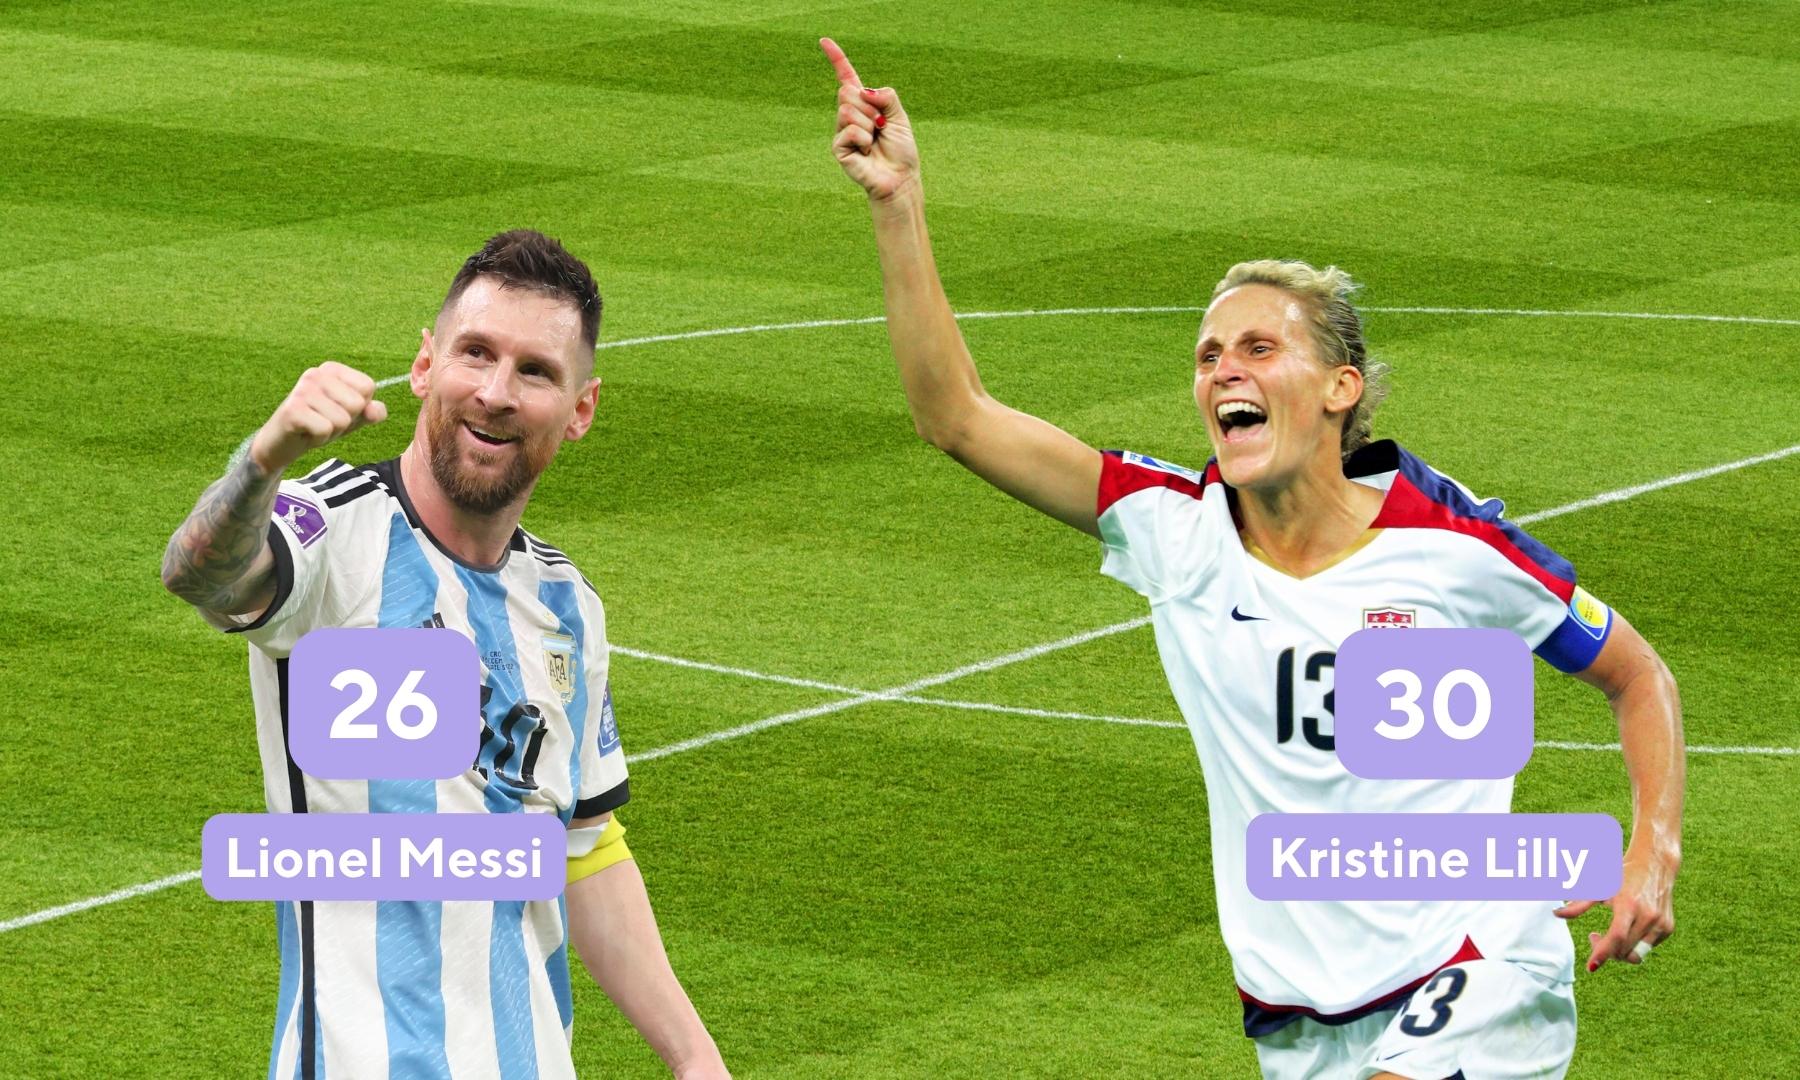 Soccer statistics of most World Cup matches include Lionel Messi and Kristine Lilly. 